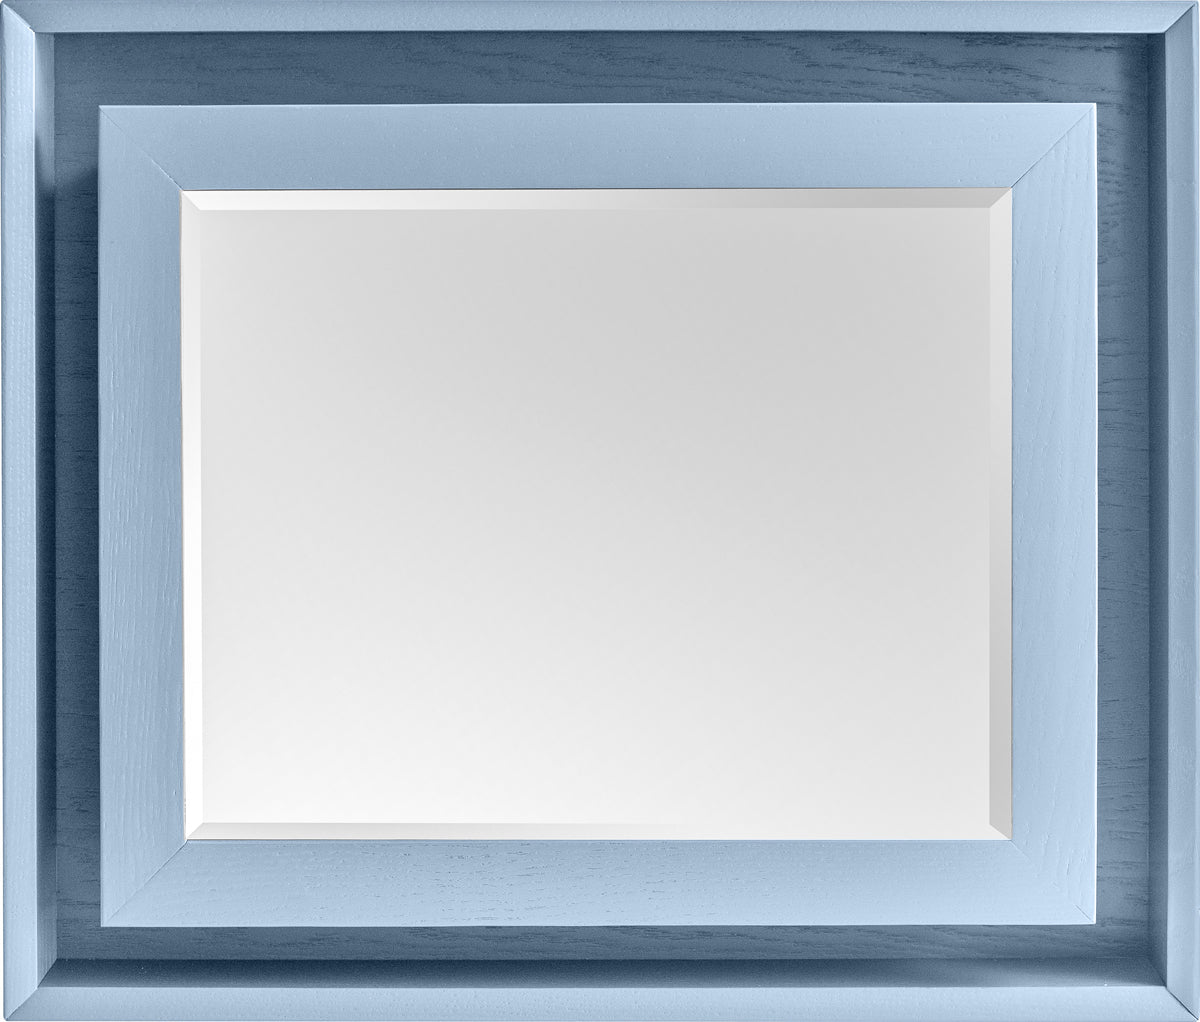 THE FRANKLIN: Shadow Box Mirror- Picture 20x16 Frame